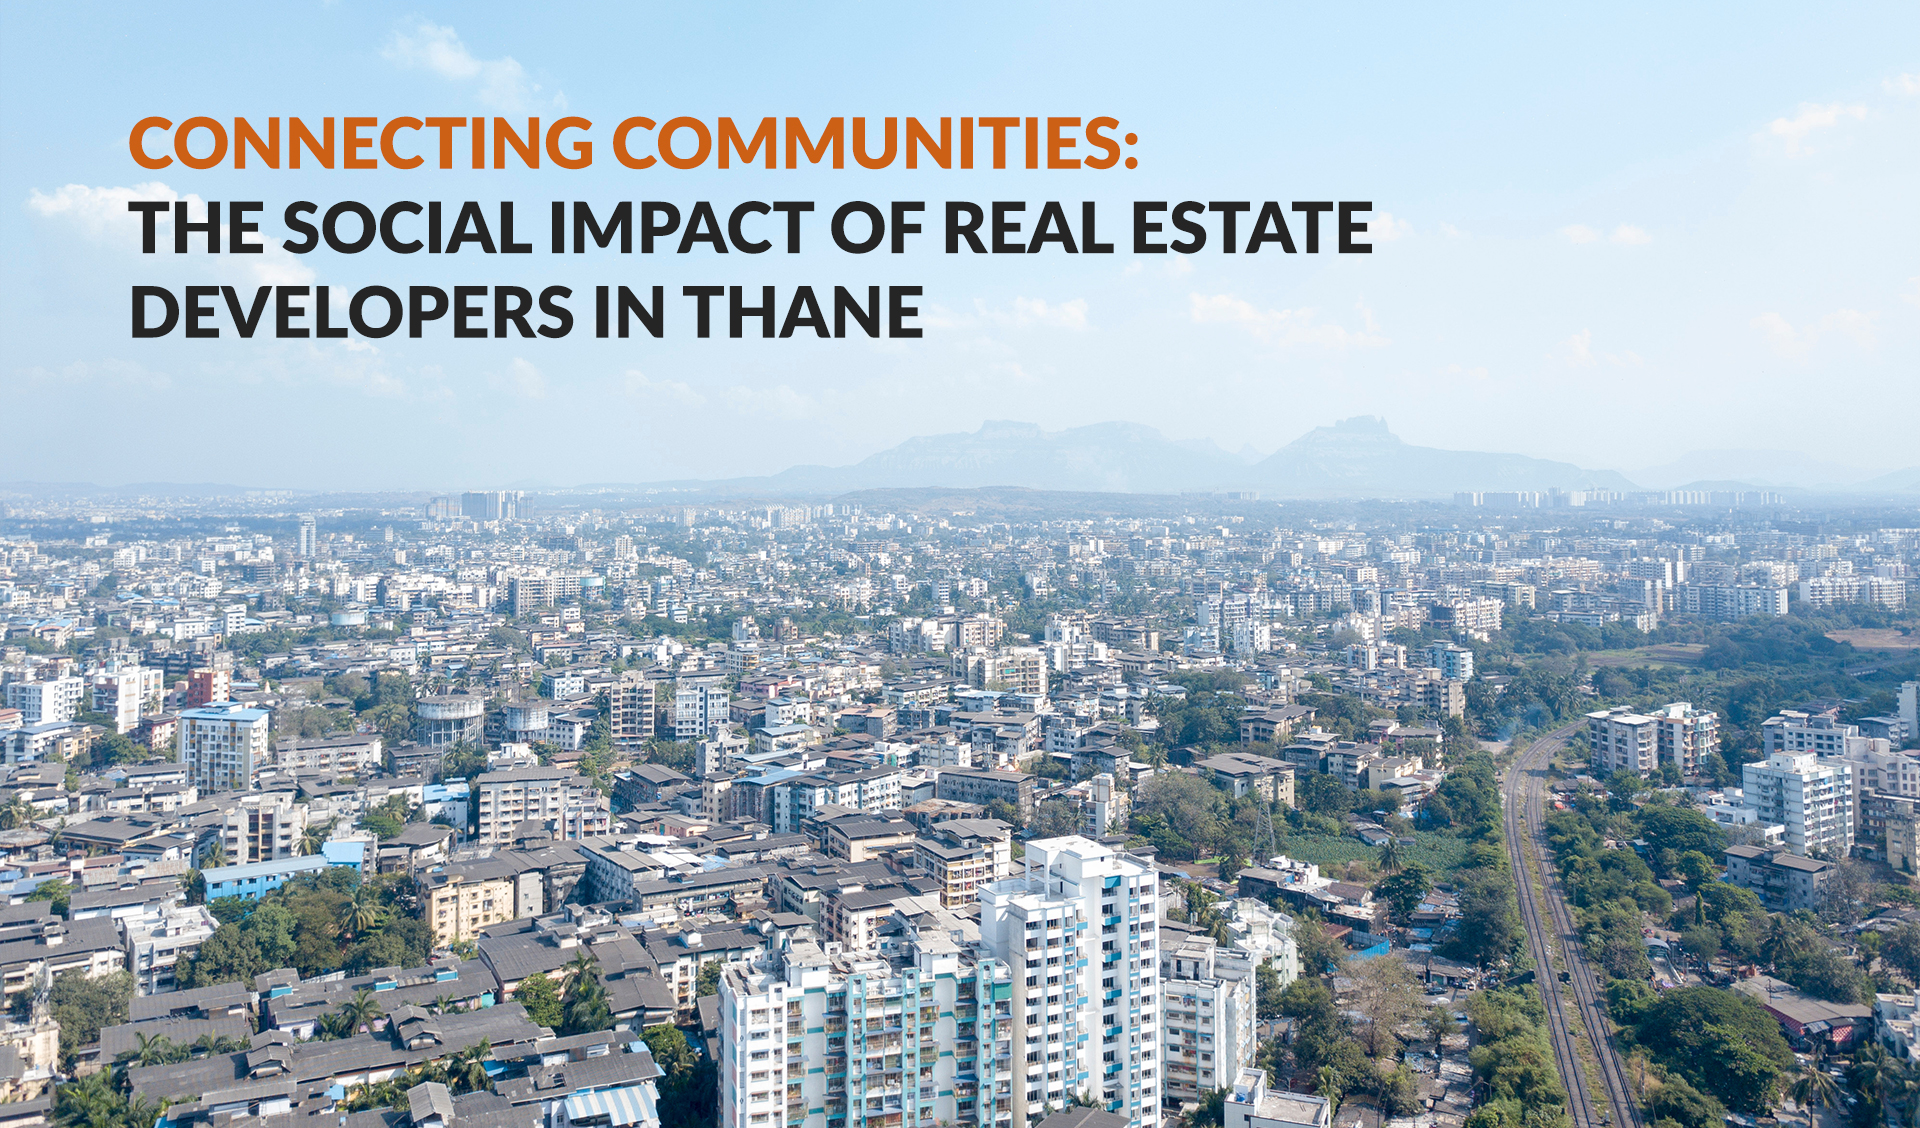 Connecting Communities: The Social Impact of Real Estate Developers in Thane